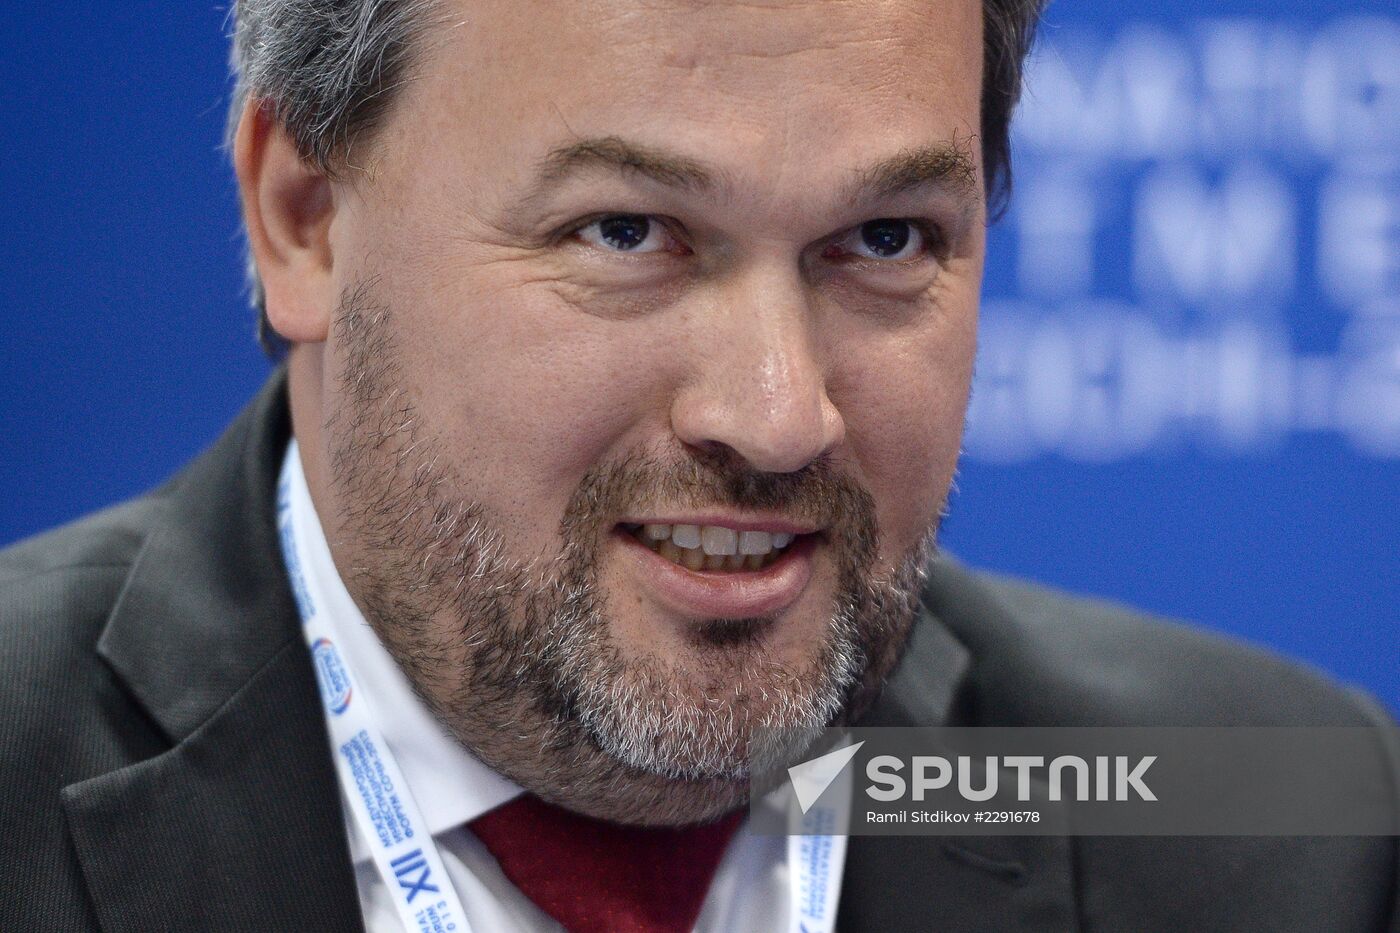 12th International Investment Forum Sochi-2013. Day Two